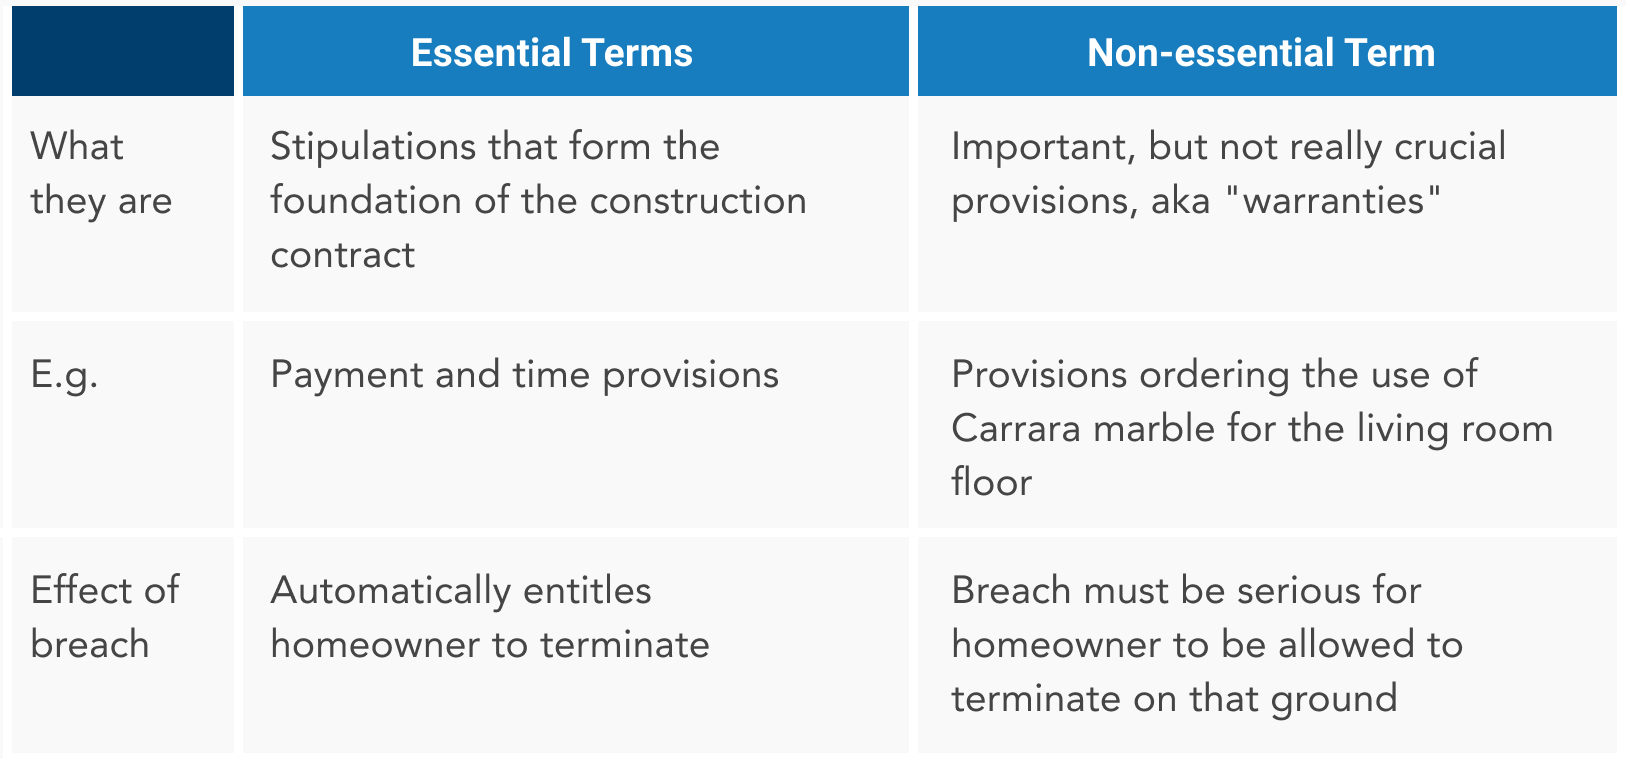 Essential Terms of Termination for Breach of Contract